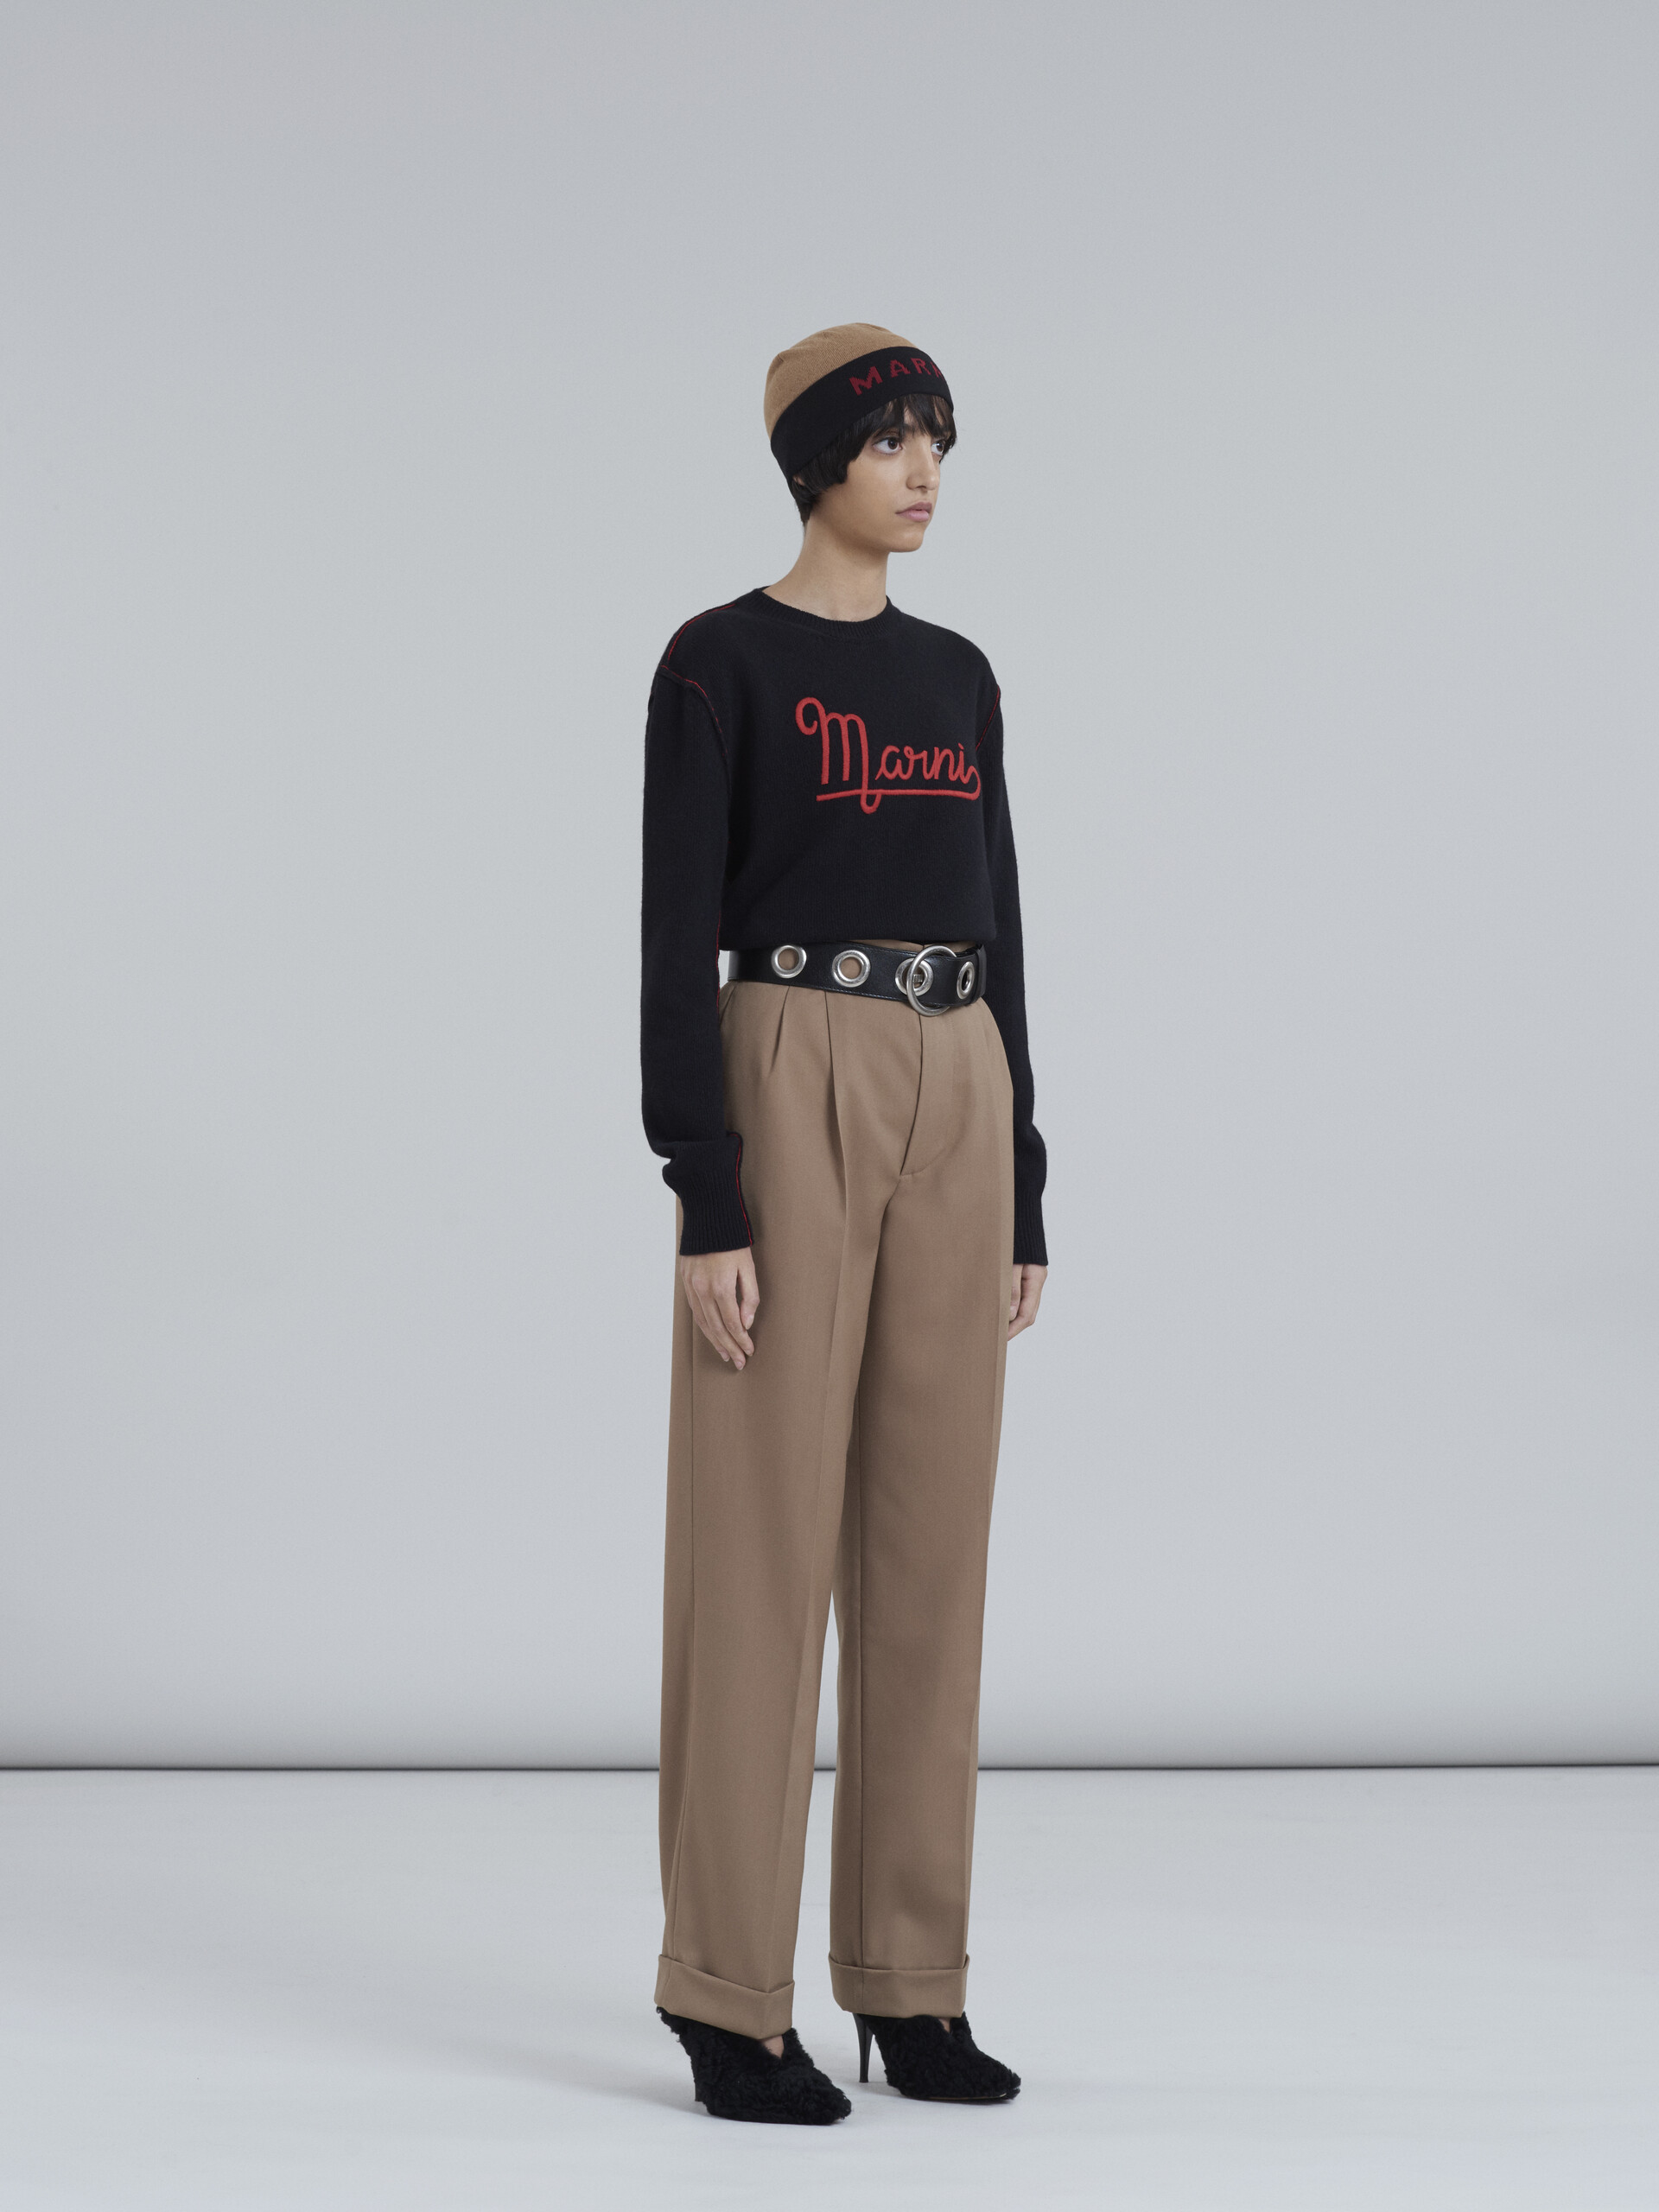 Black Shetland wool long-sleeved sweater with embroidered Marni logo - Pullovers - Image 5